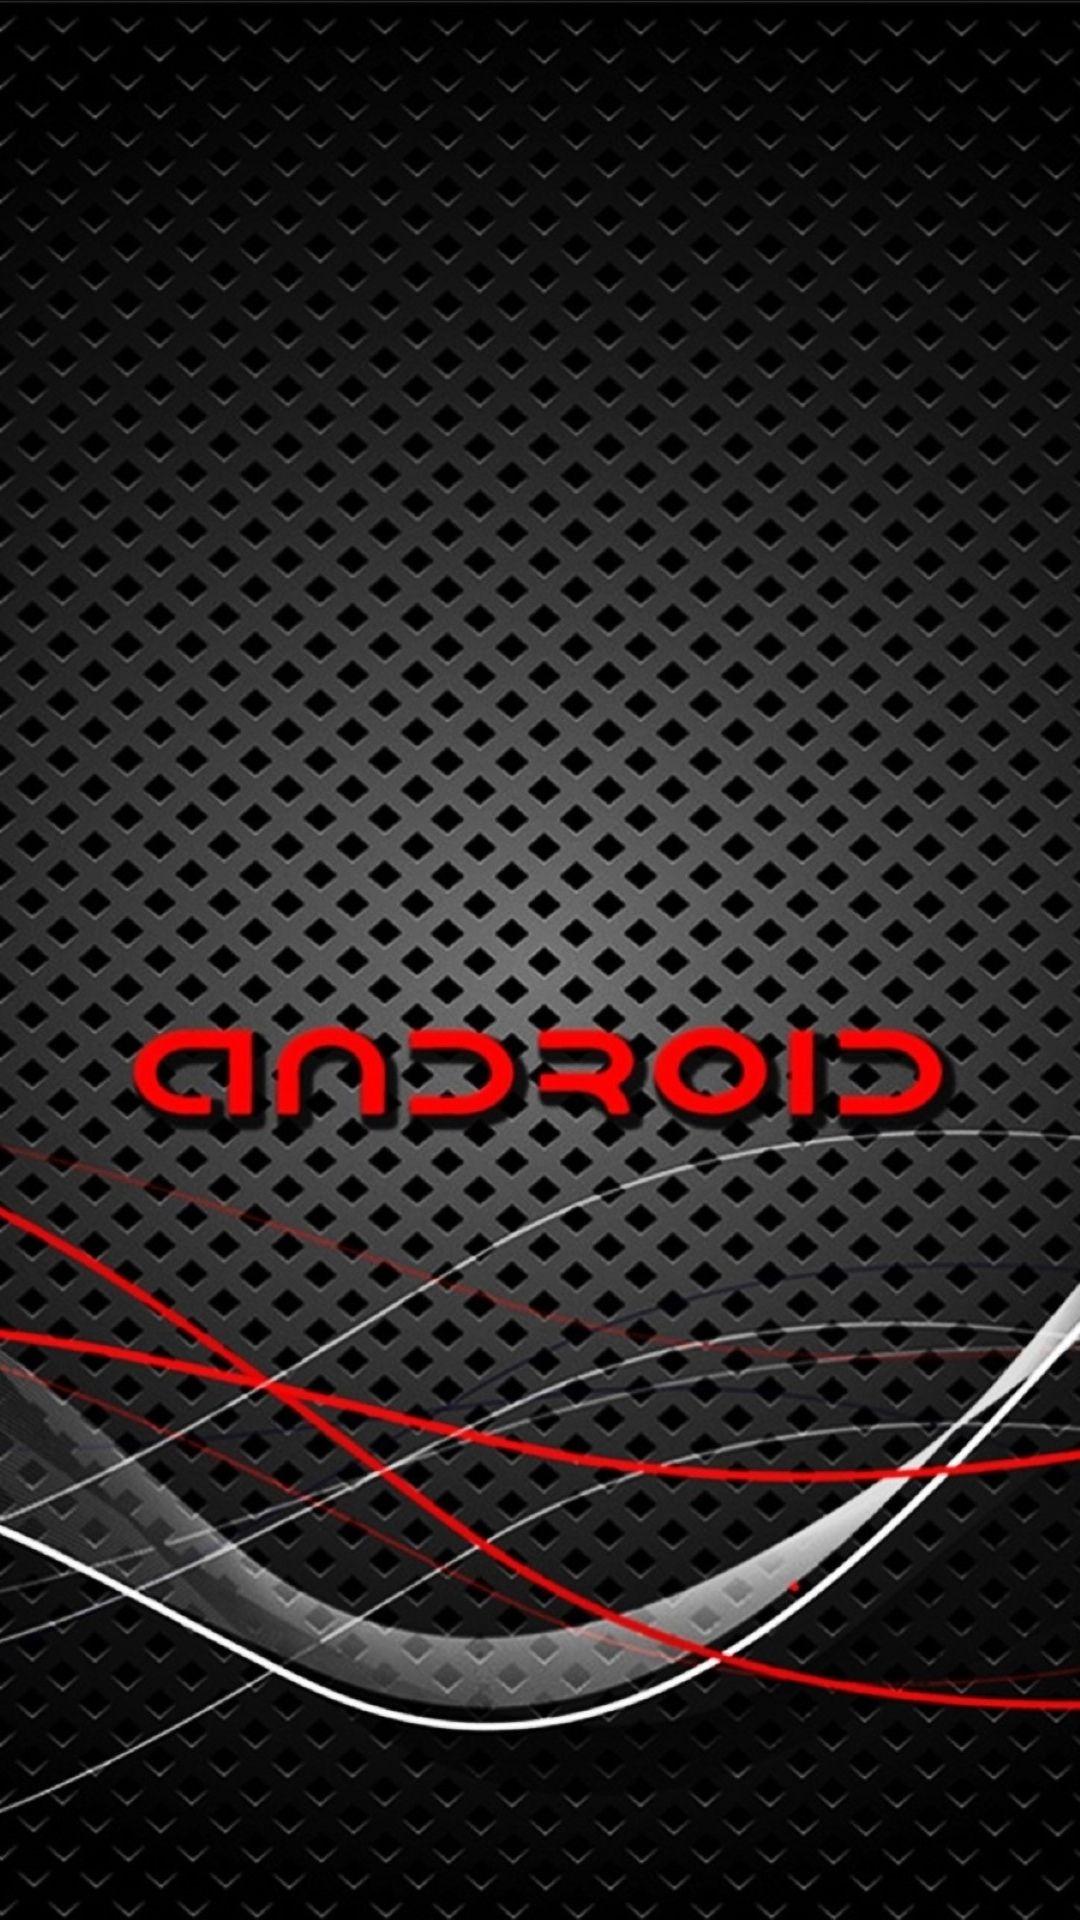 Best Android Wallpapers 2019: Wallpapers for Samsung Galaxy